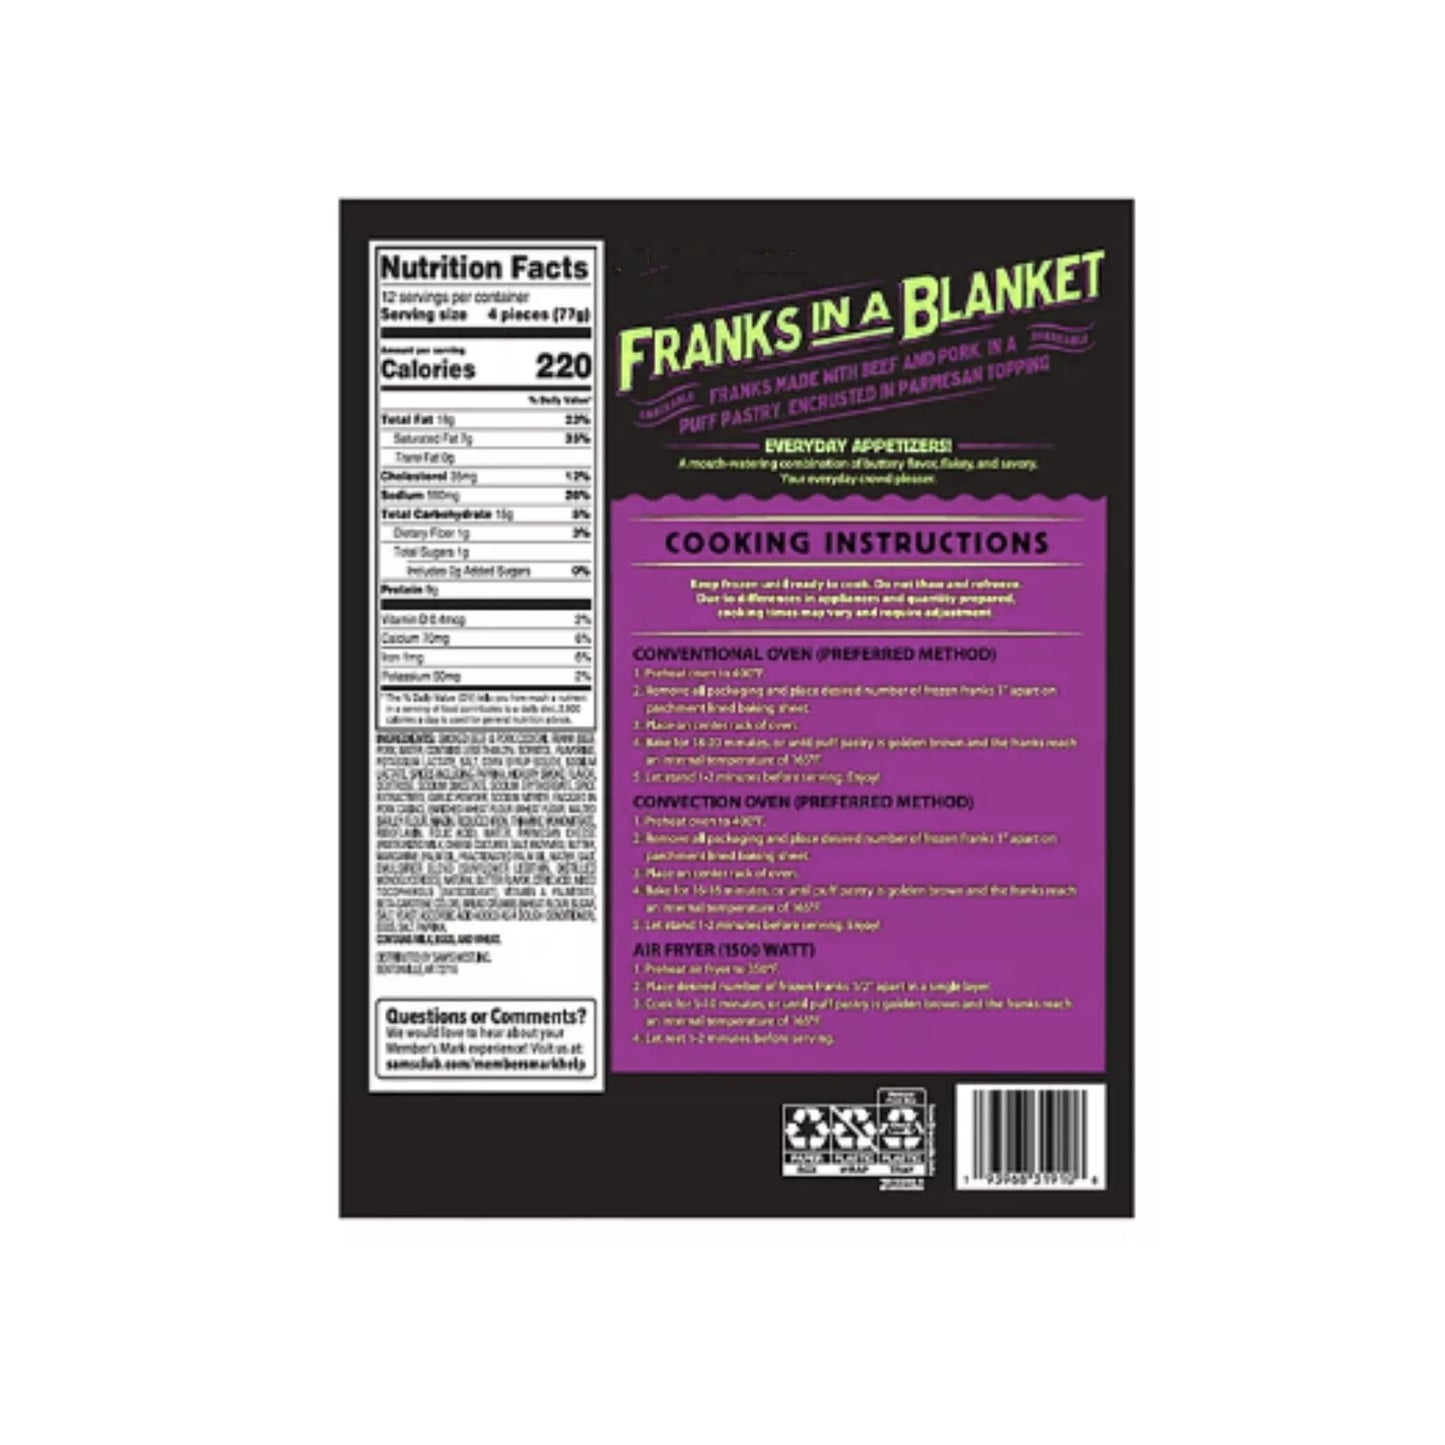 Member's Mark Franks in a Blanket With Parmesan Cheese, Freezer (48 ct.)